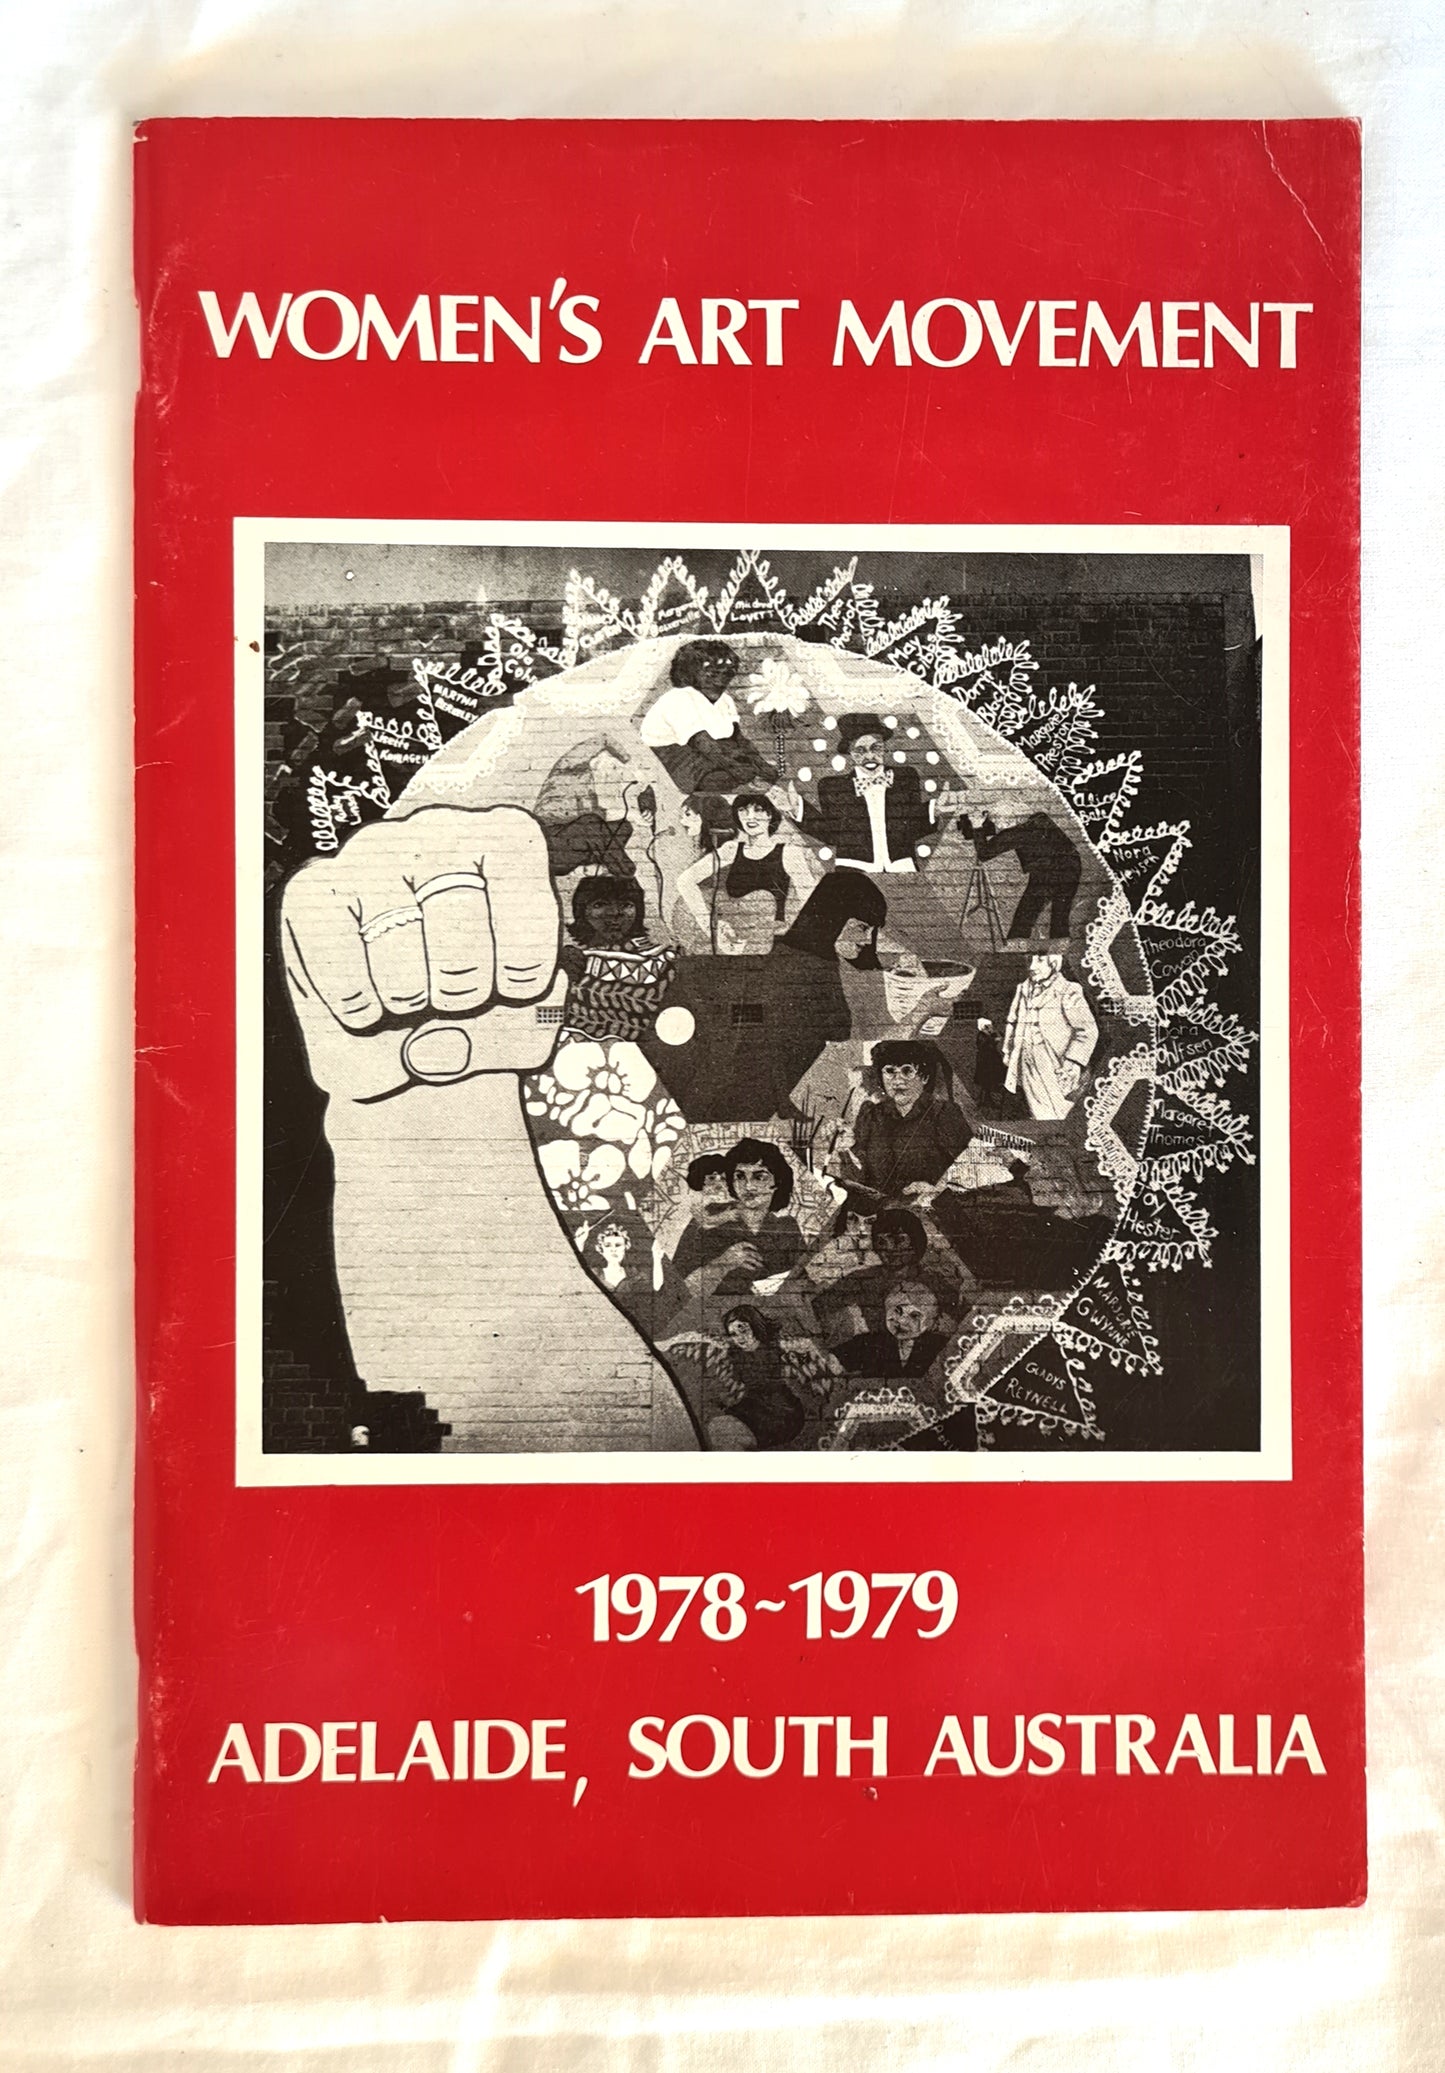 Women’s Art Movement  1978-1979 Adelaide, South Australia  Co-ordinated by Karilyn Brown